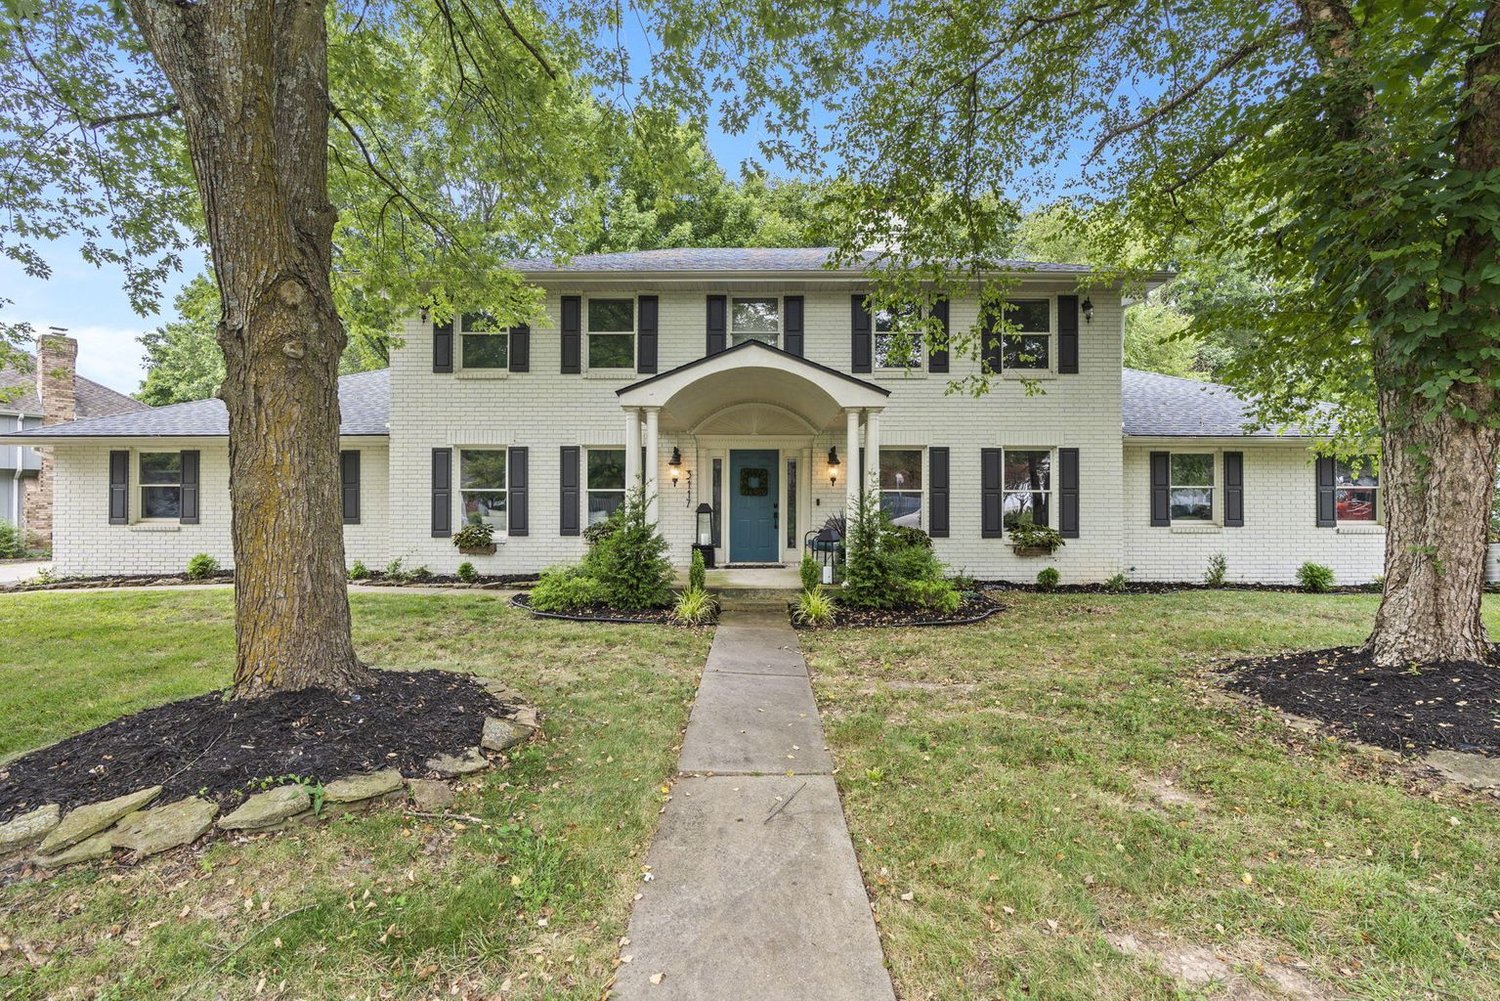 3117 S. Chambery Ave.
$545,000
Bedrooms: 6
Bathrooms: 5
Listing firm: Keller Williams Greater Springfield